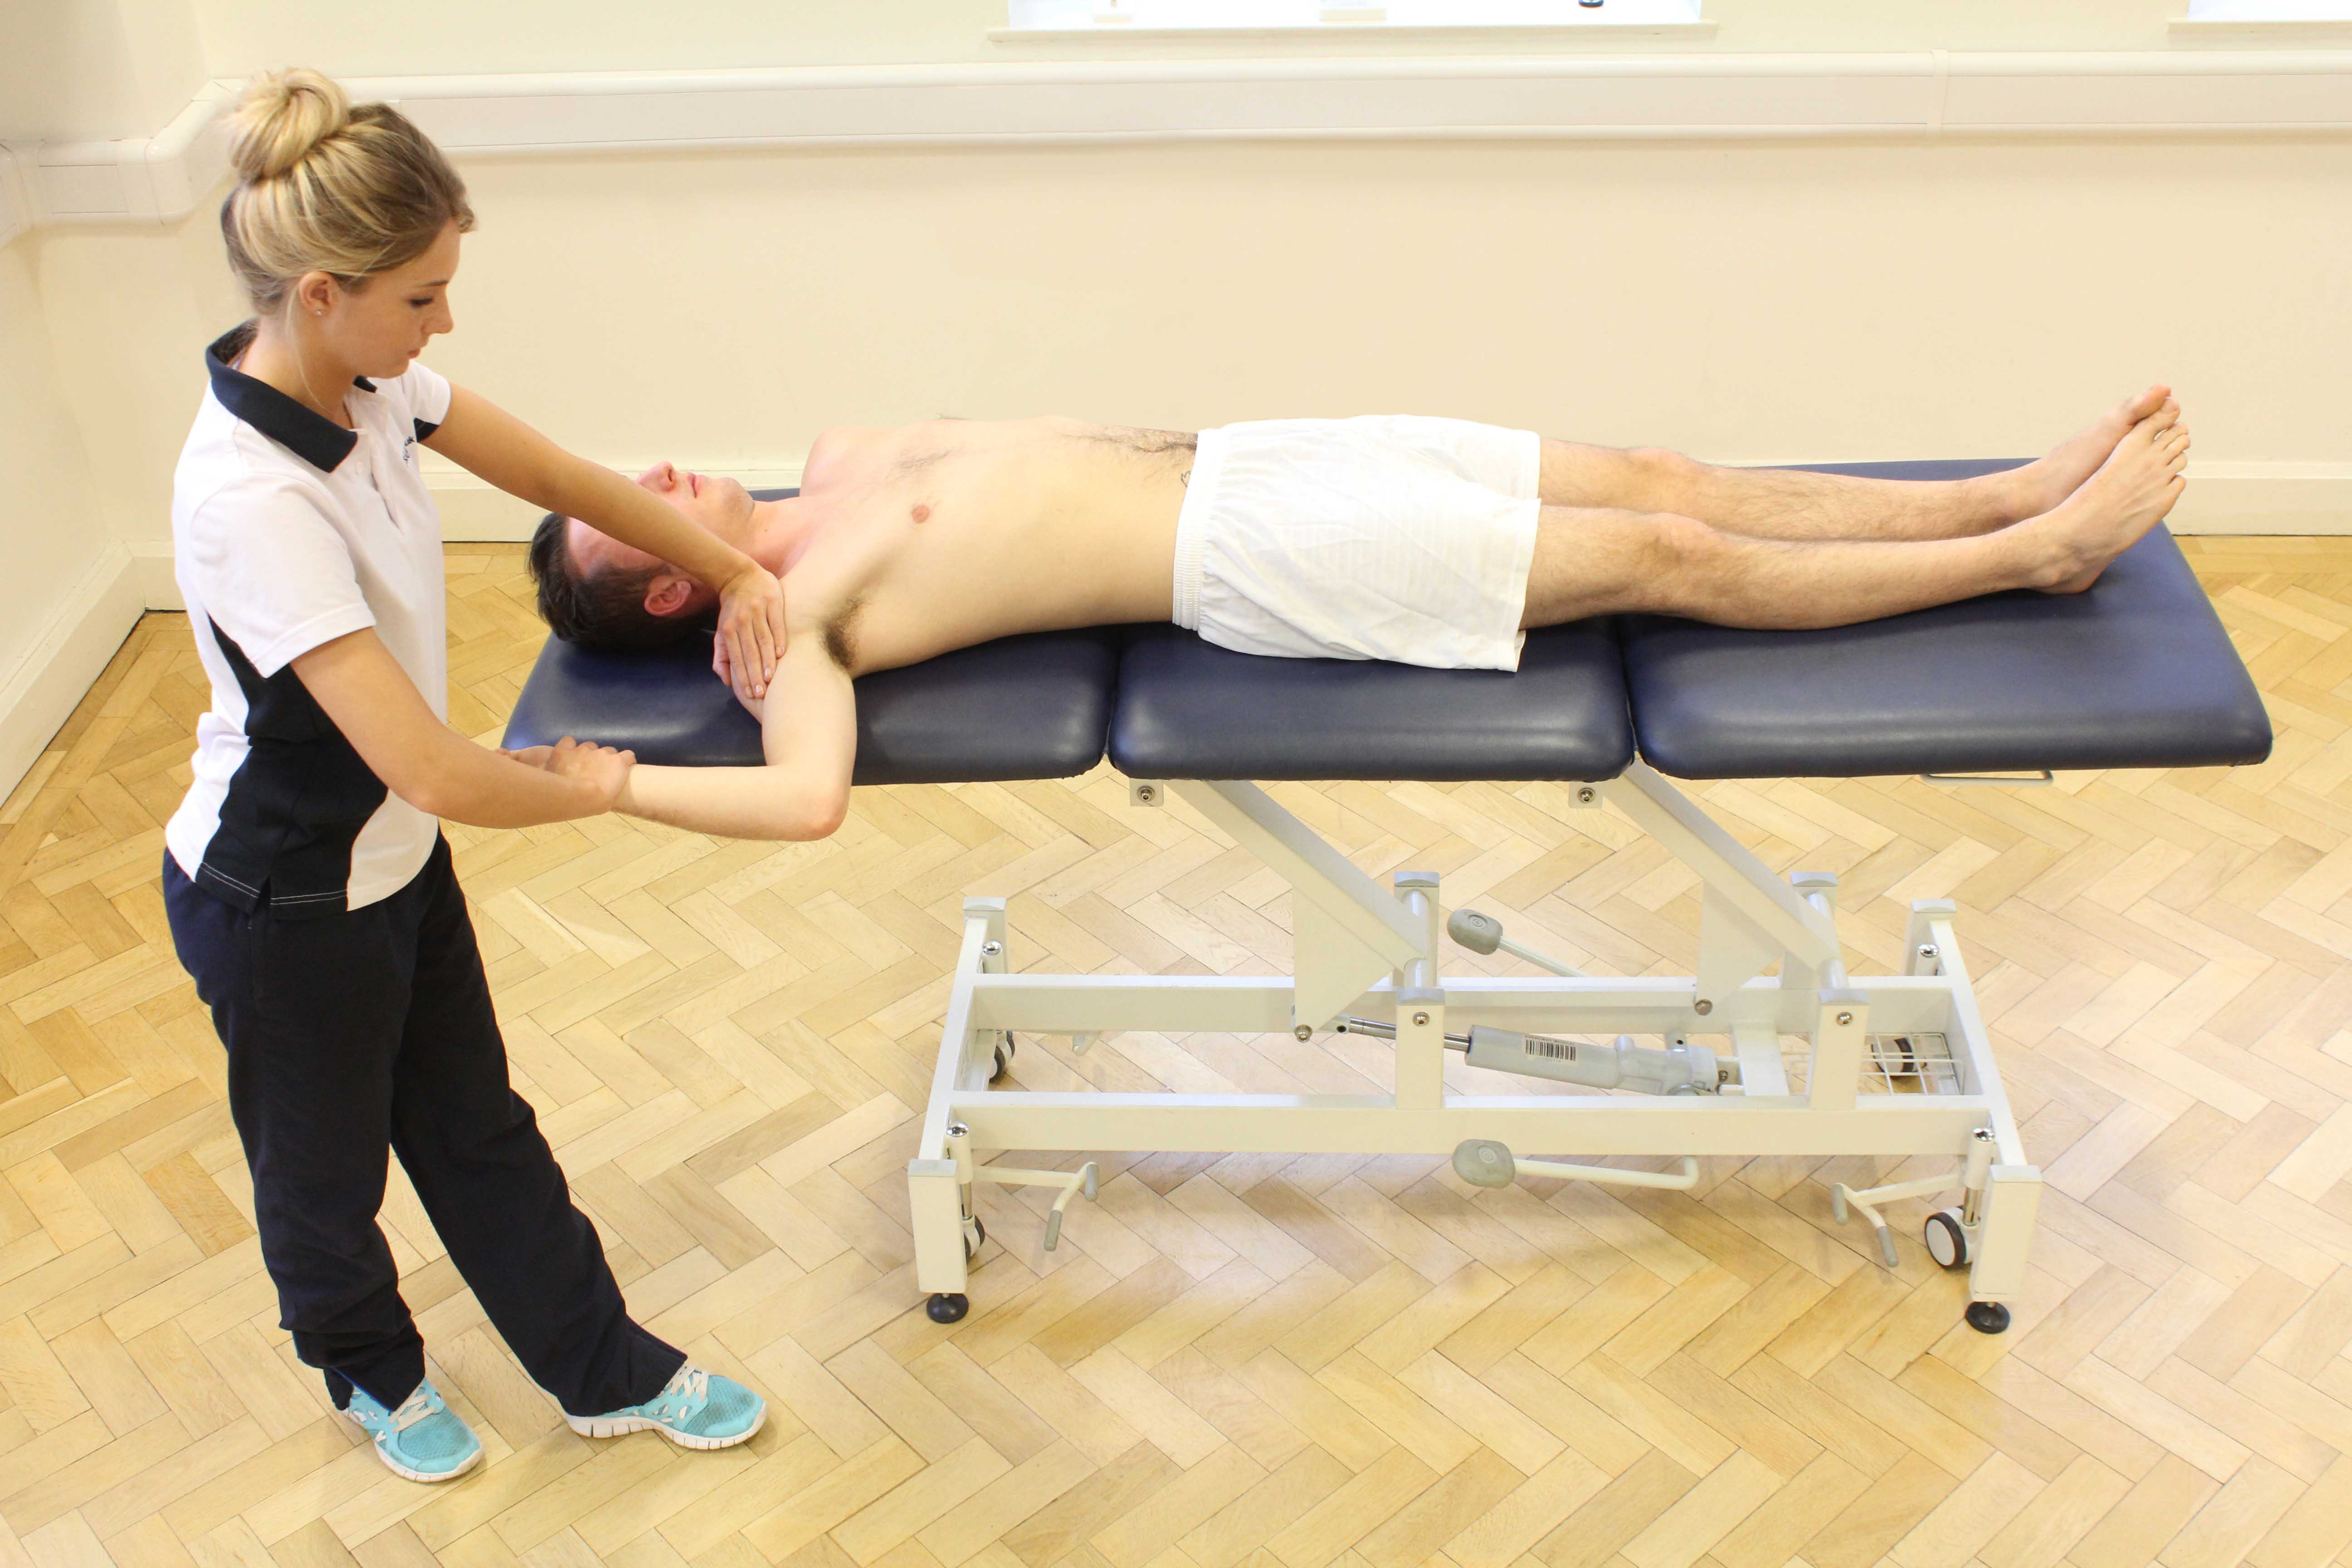 Soft tissue massage of the palma fascia to relieve pain and stiffness